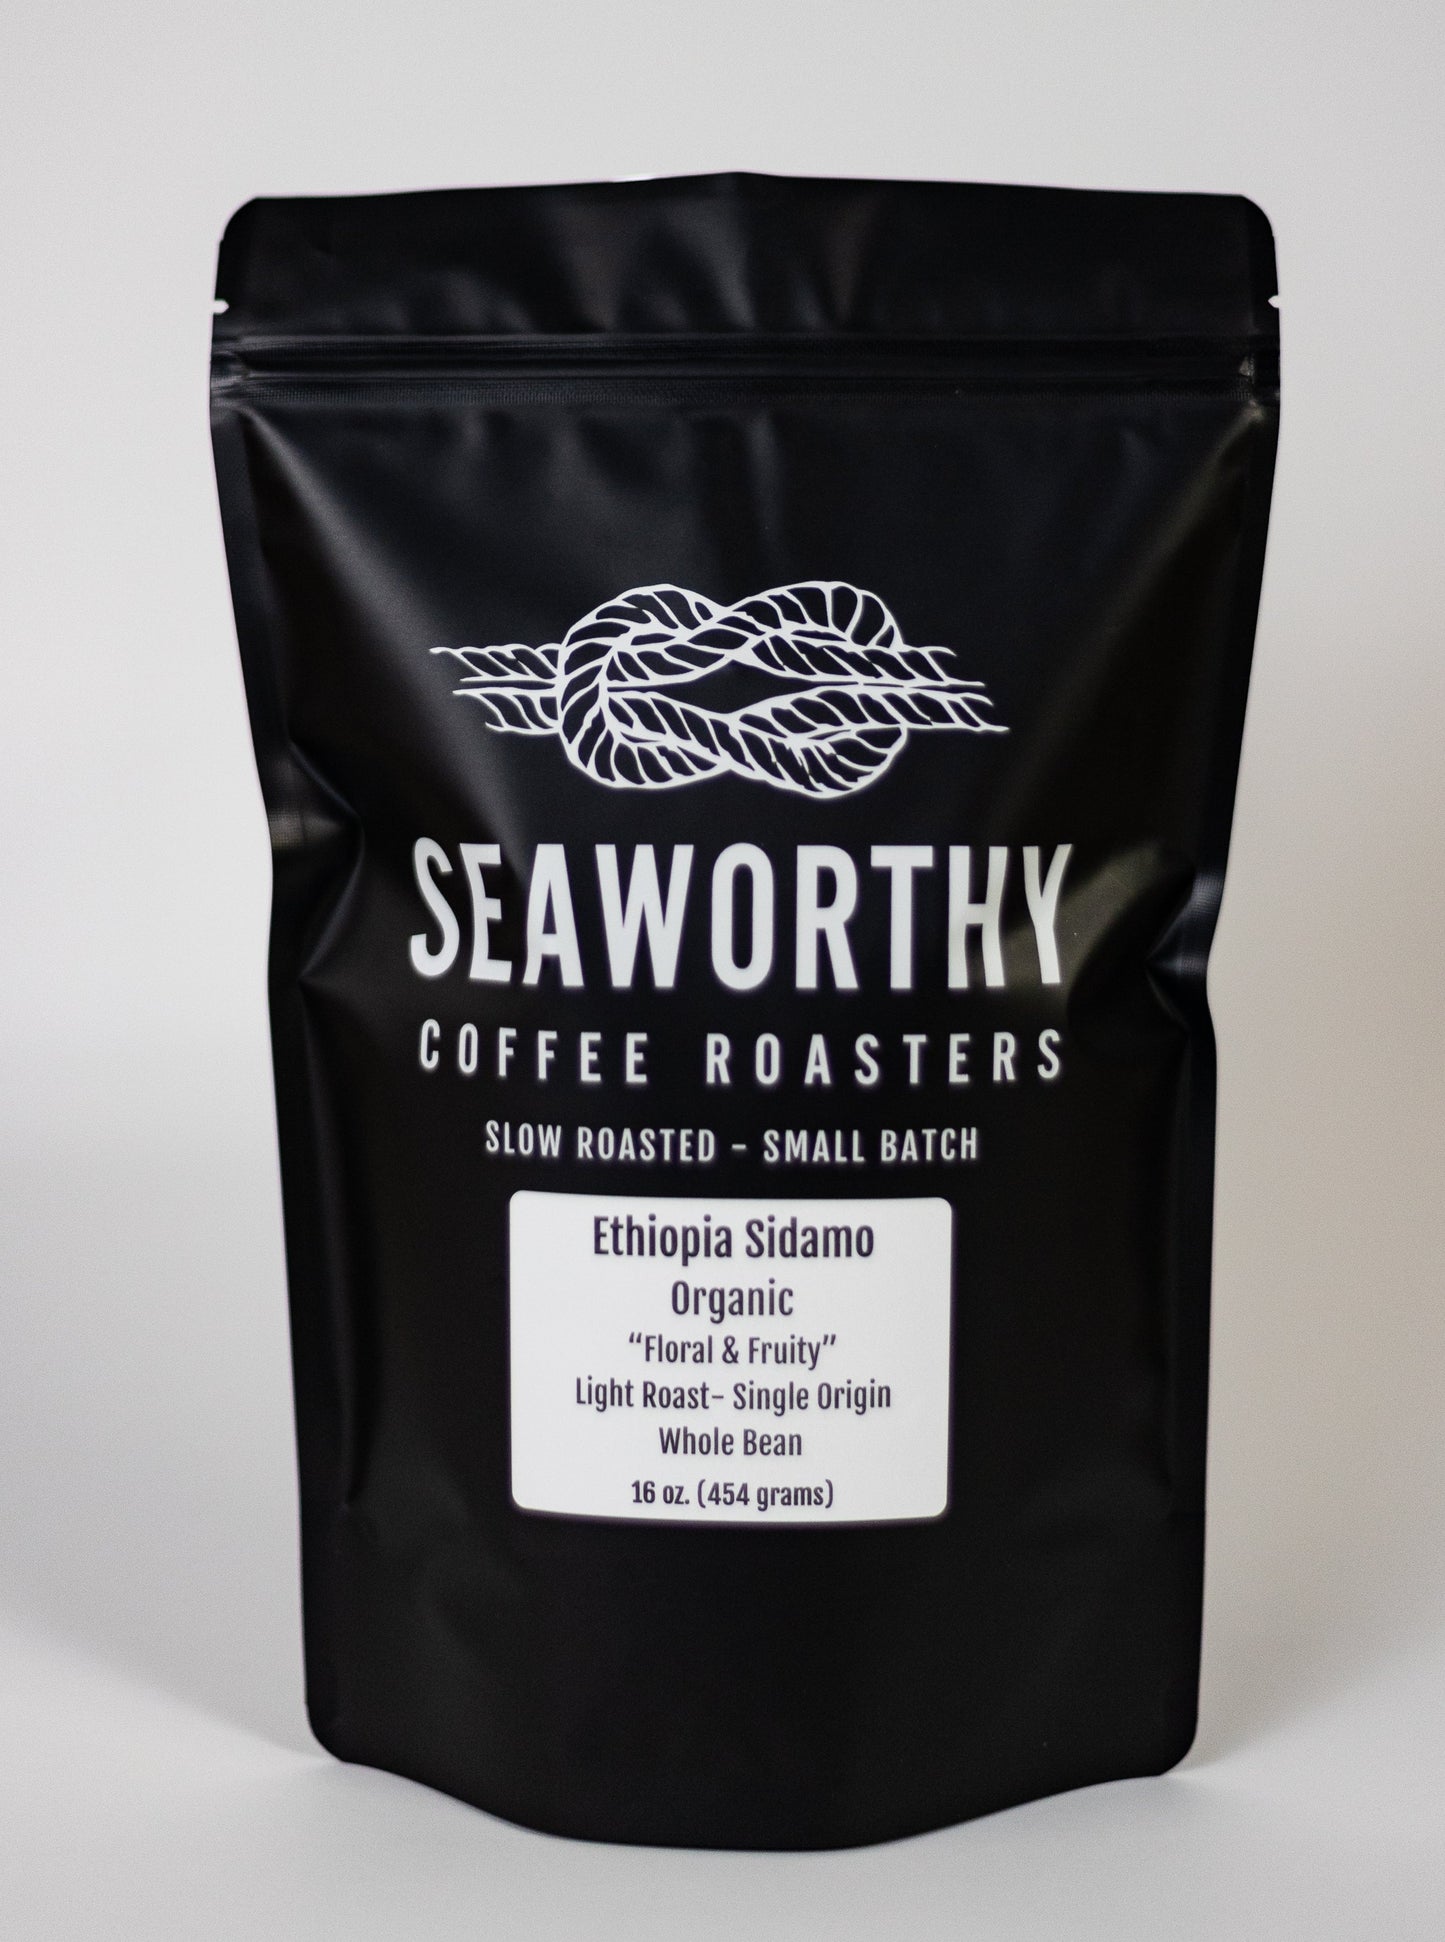 Seaworthy slow roasted, small batch coffee. Experience the flavor notes of caramel and citrus fruits, with bright acidity and a full body. Perfectly balanced with a lovely aroma from the first to last sip. Since this coffee is roasted light, there is a higher concentration of caffeine, making this a great way to start your day!